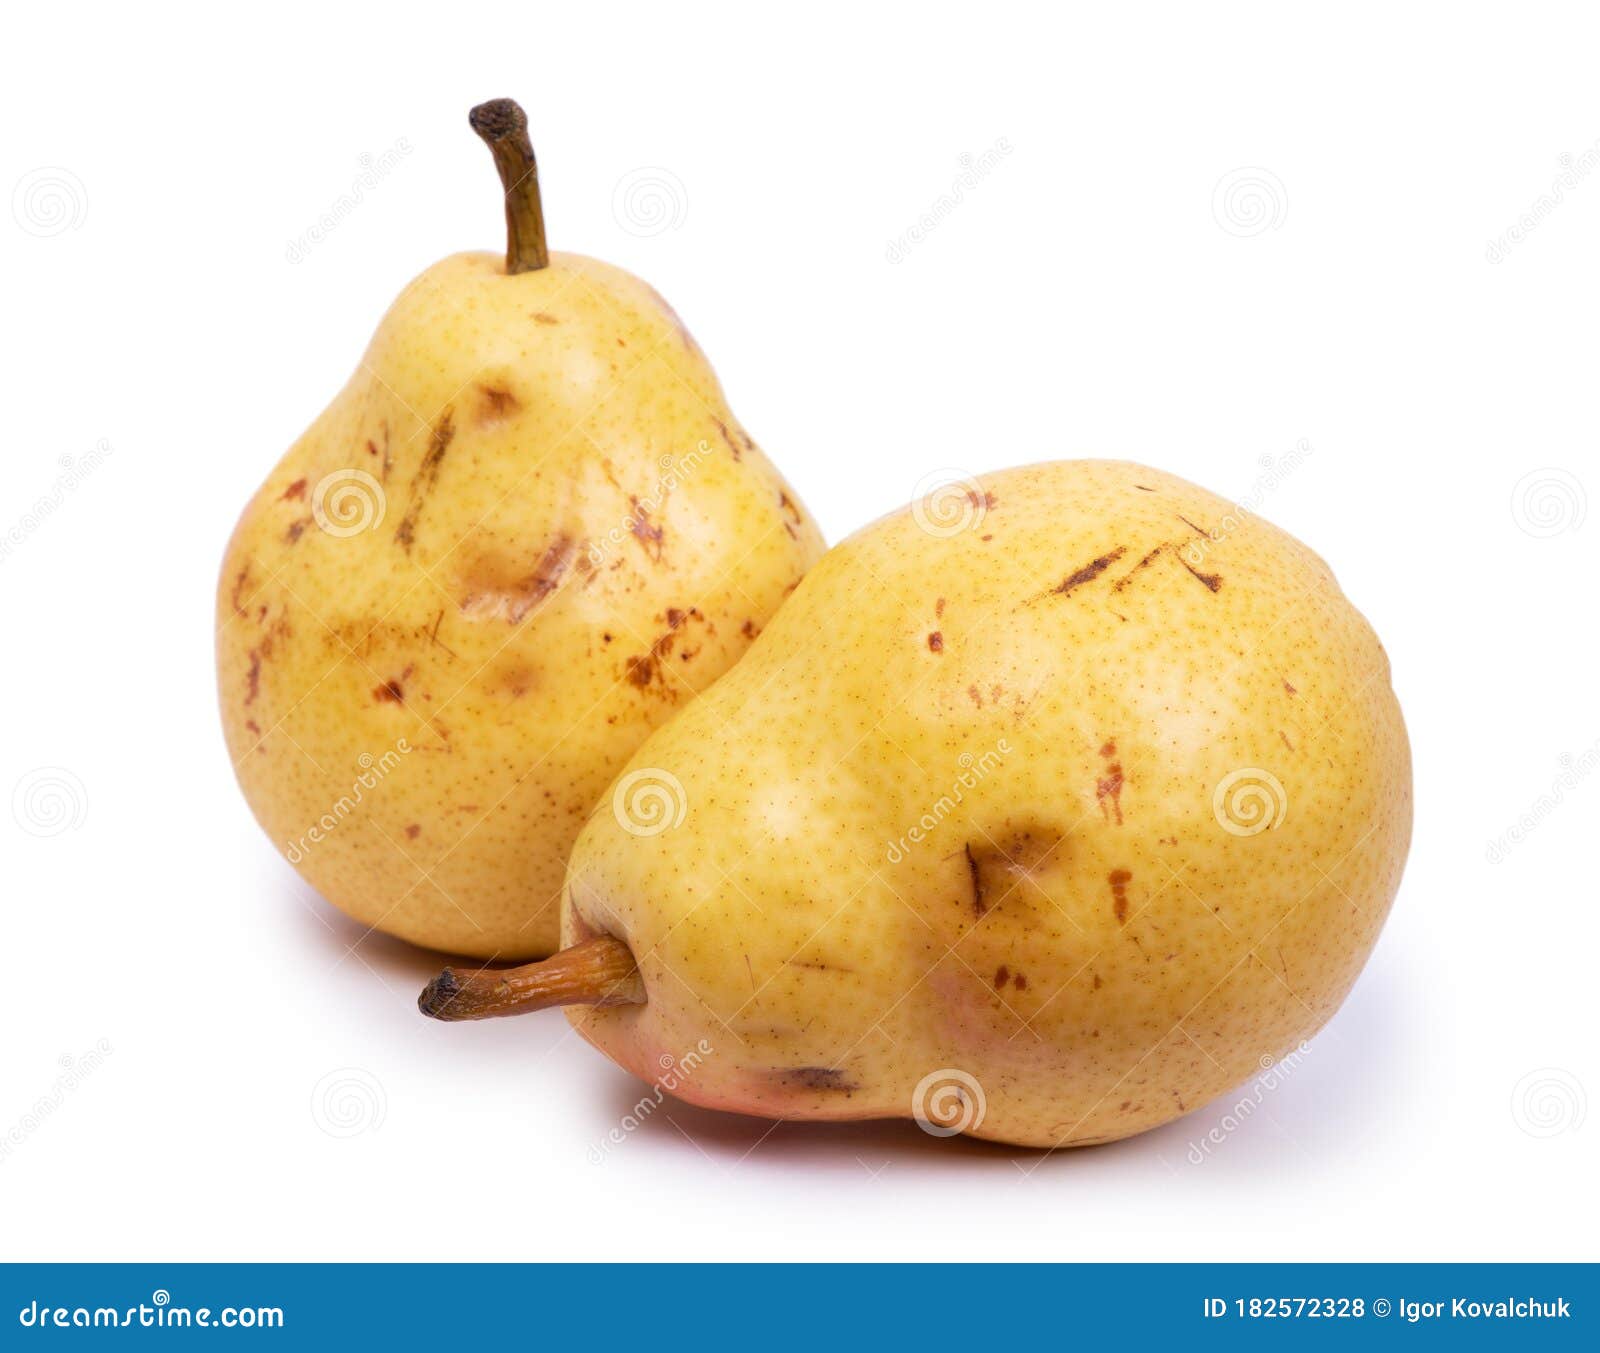 natural ripe flawed pears